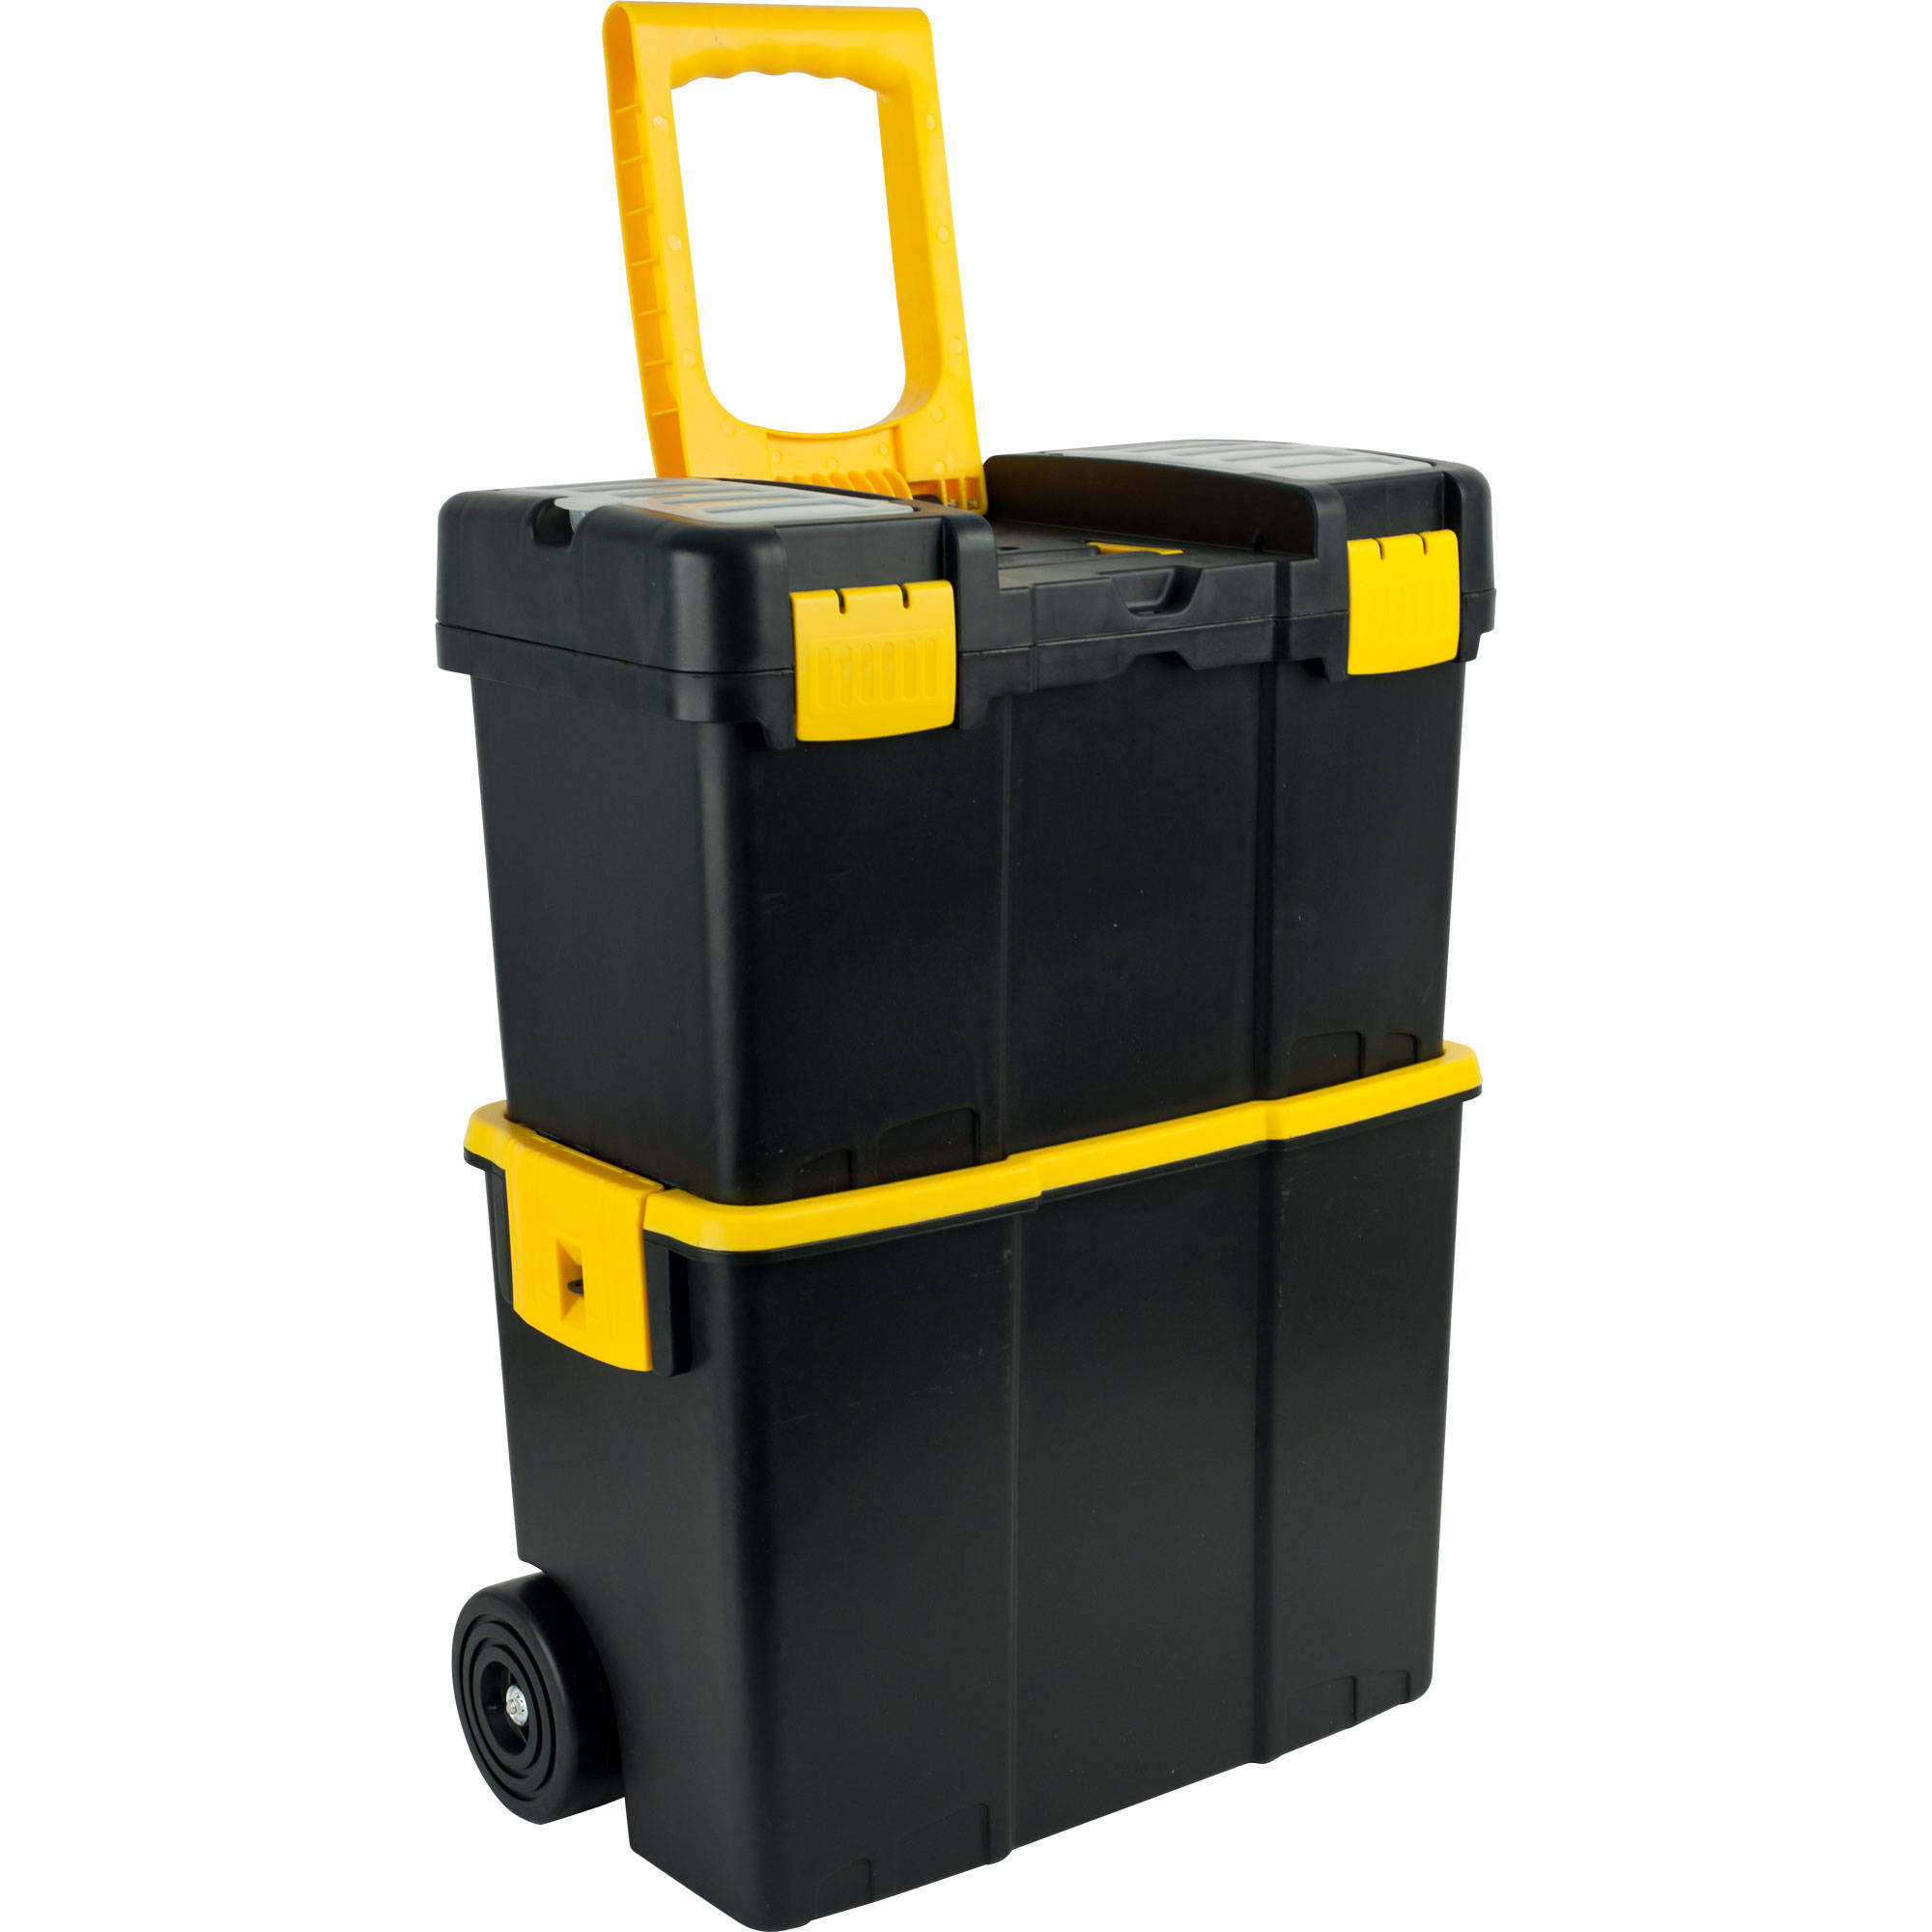 Portable Tool Storage Work Center Containers Wheels Handle Box Tray Heavy Duty 